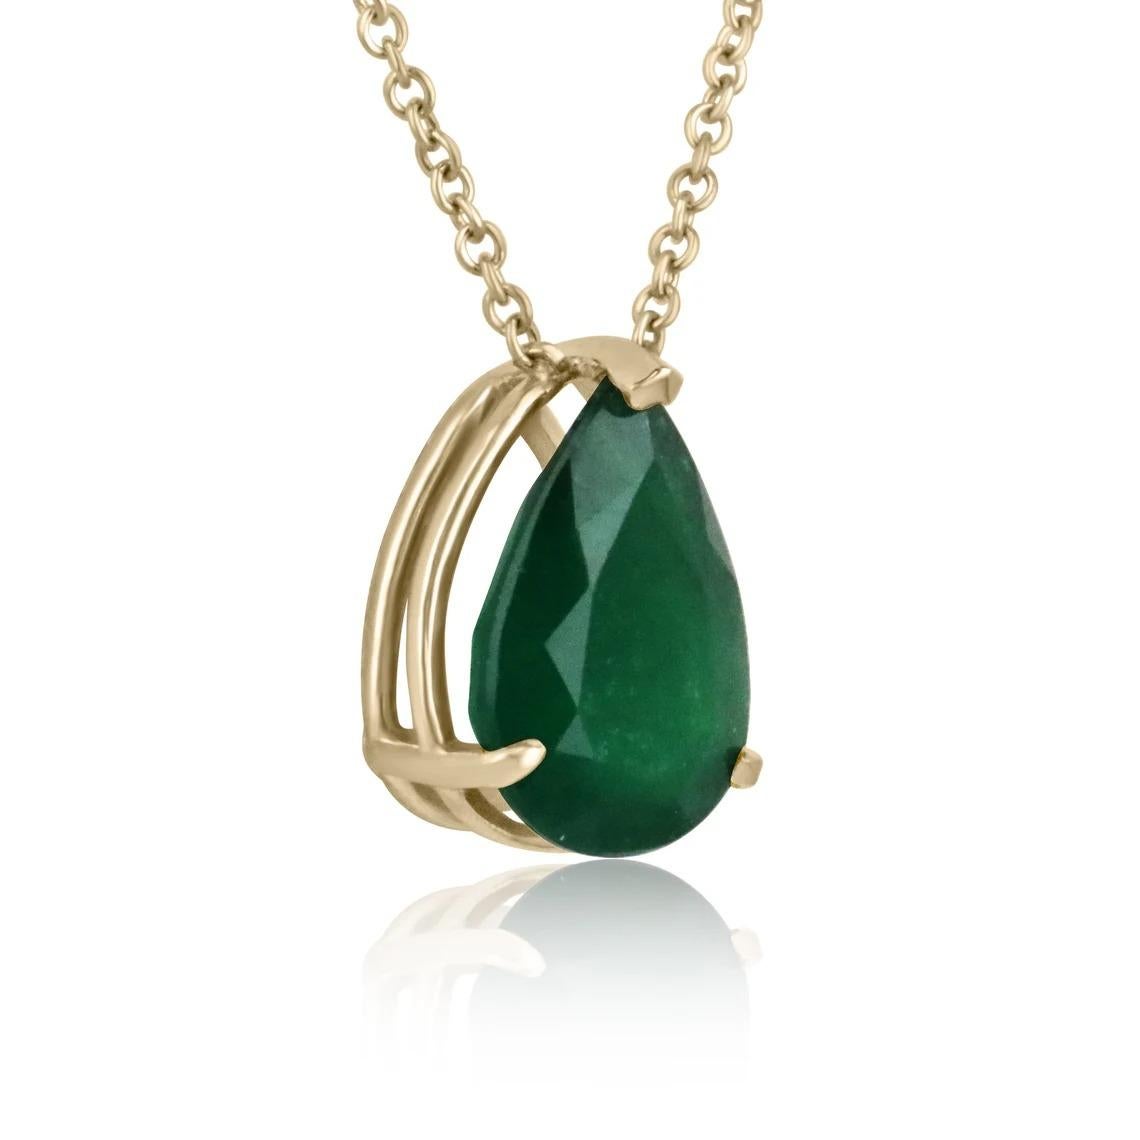 Displayed is a classic Brazillian emerald solitaire necklace set in 14K yellow gold. This gorgeous solitaire ring carries a full 5.74-carat emerald in a three-prong setting. Fully faceted, this gemstone showcases excellent shine. The emerald has